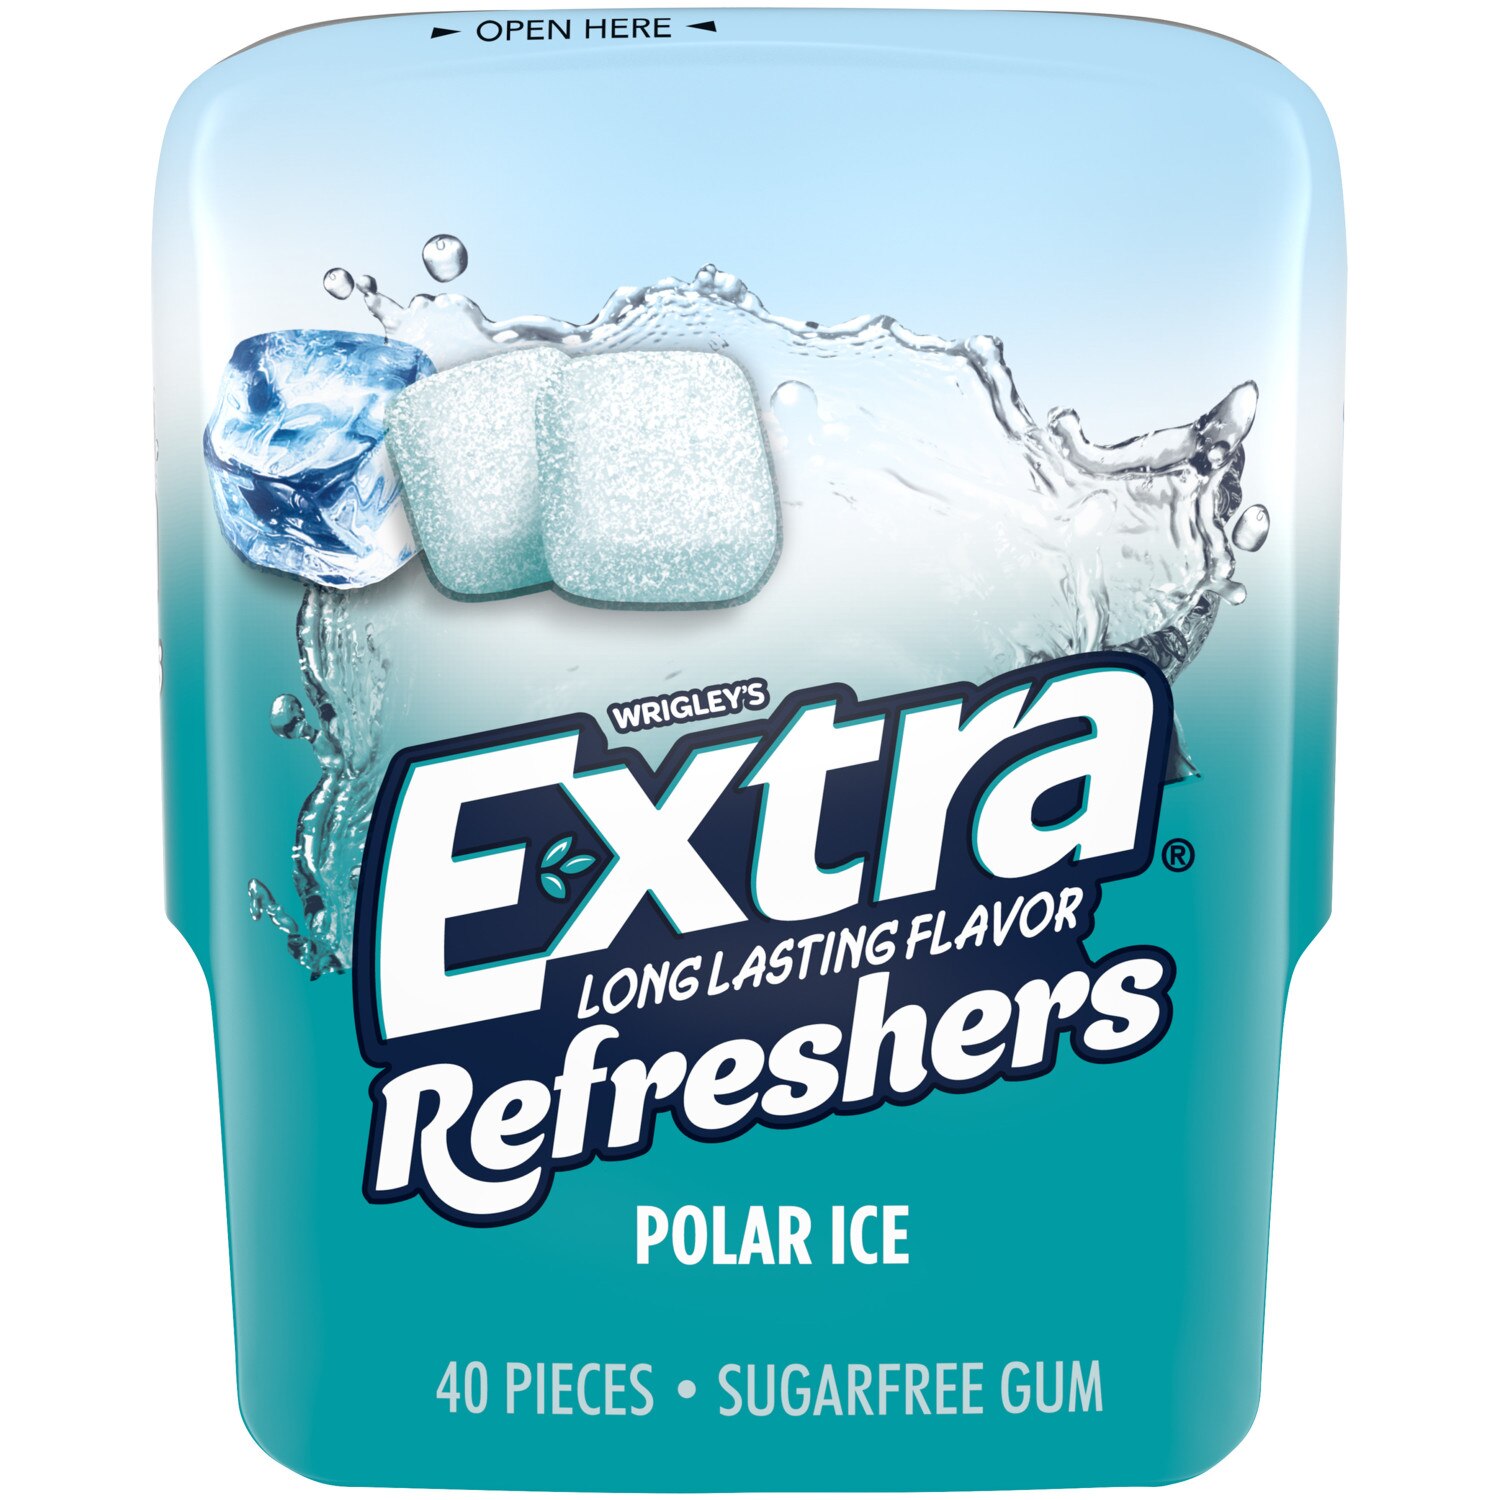 EXTRA Refreshers Polar Ice Sugar Free Chewing Gum, 40 Pieces - 40 Ct , CVS